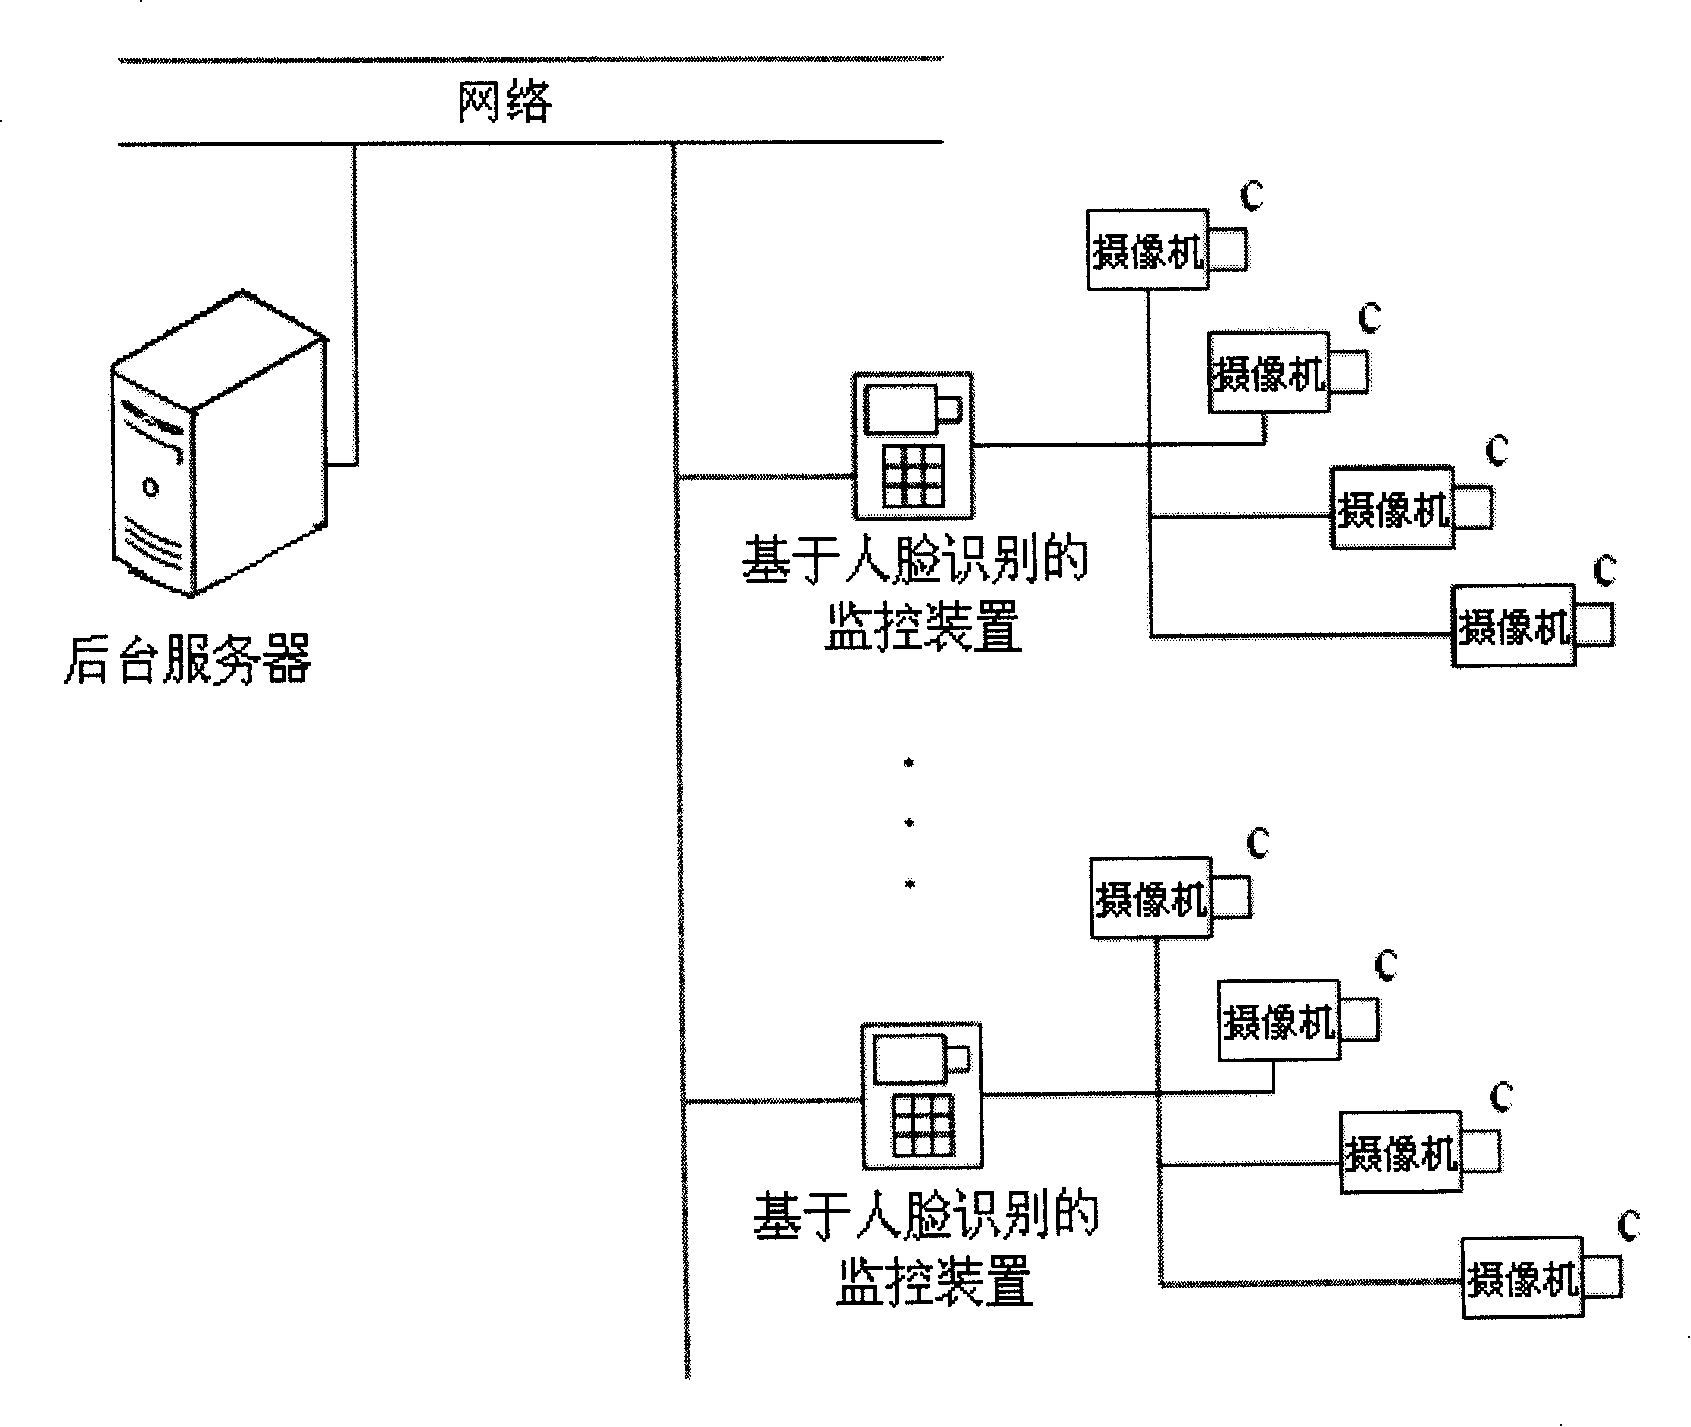 Monitoring apparatus based on face recognition and built-in type door control monitoring system